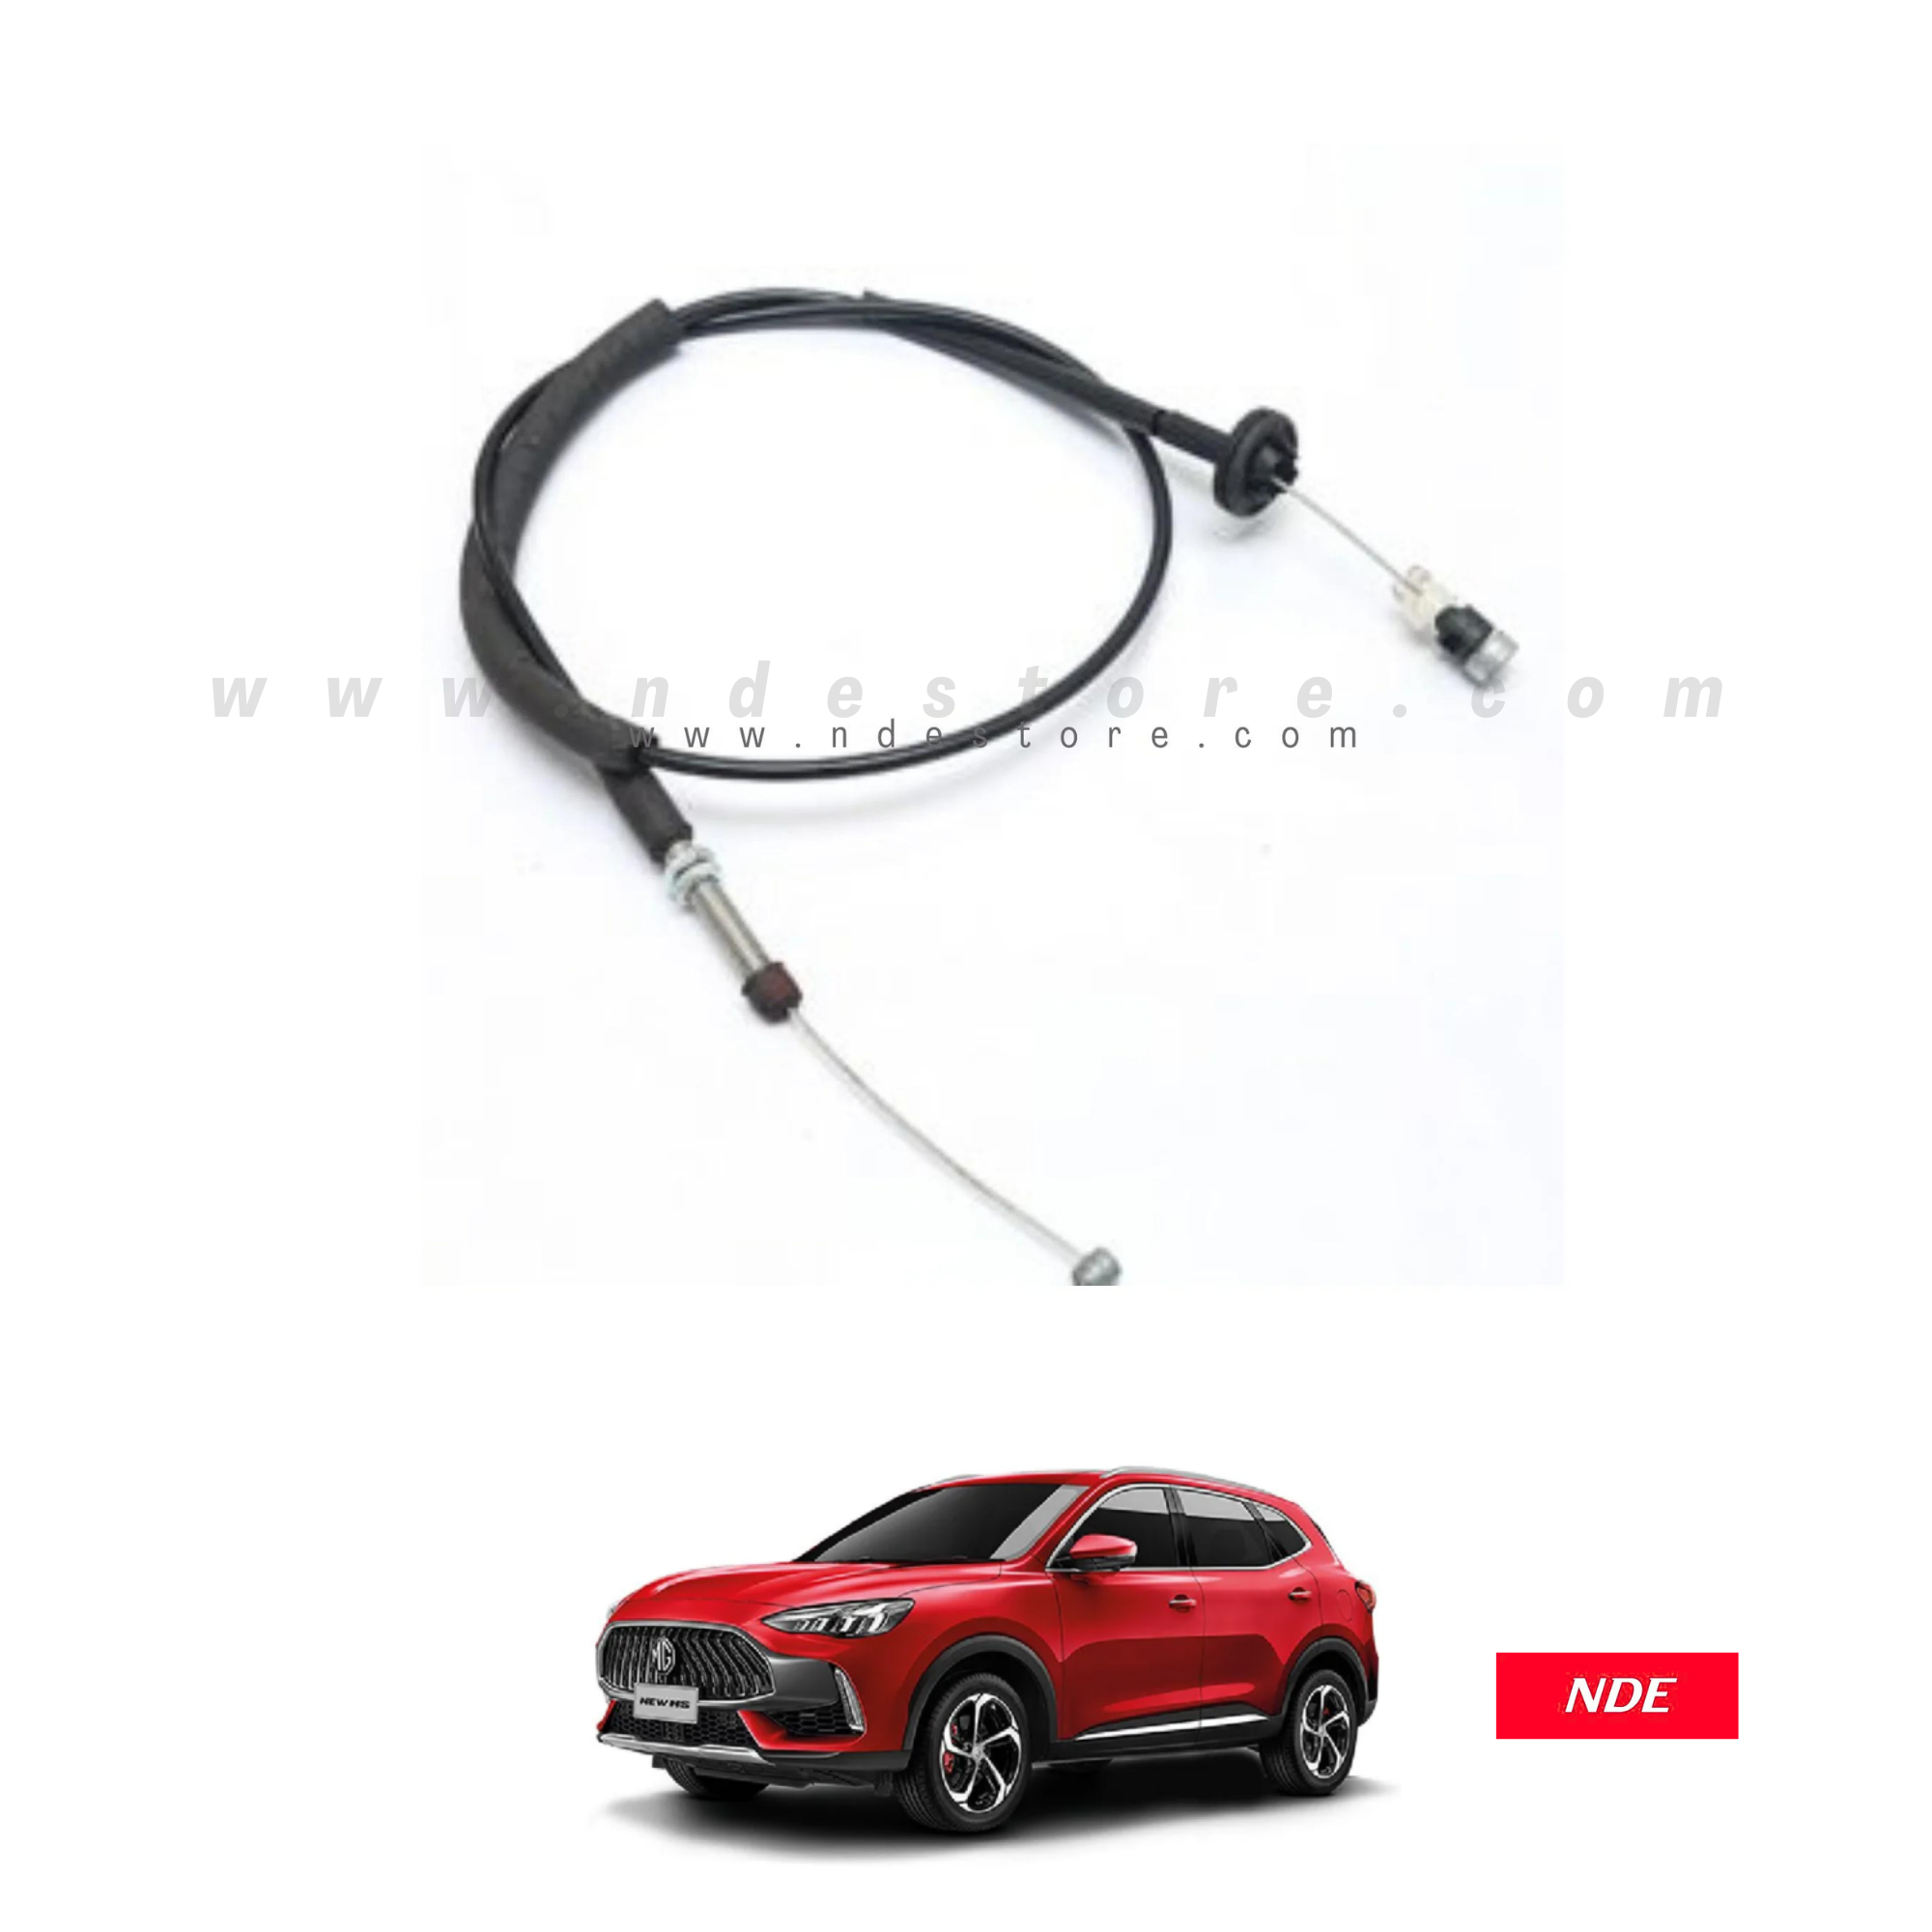 BONNET CABLE ASSY FOR MG HS